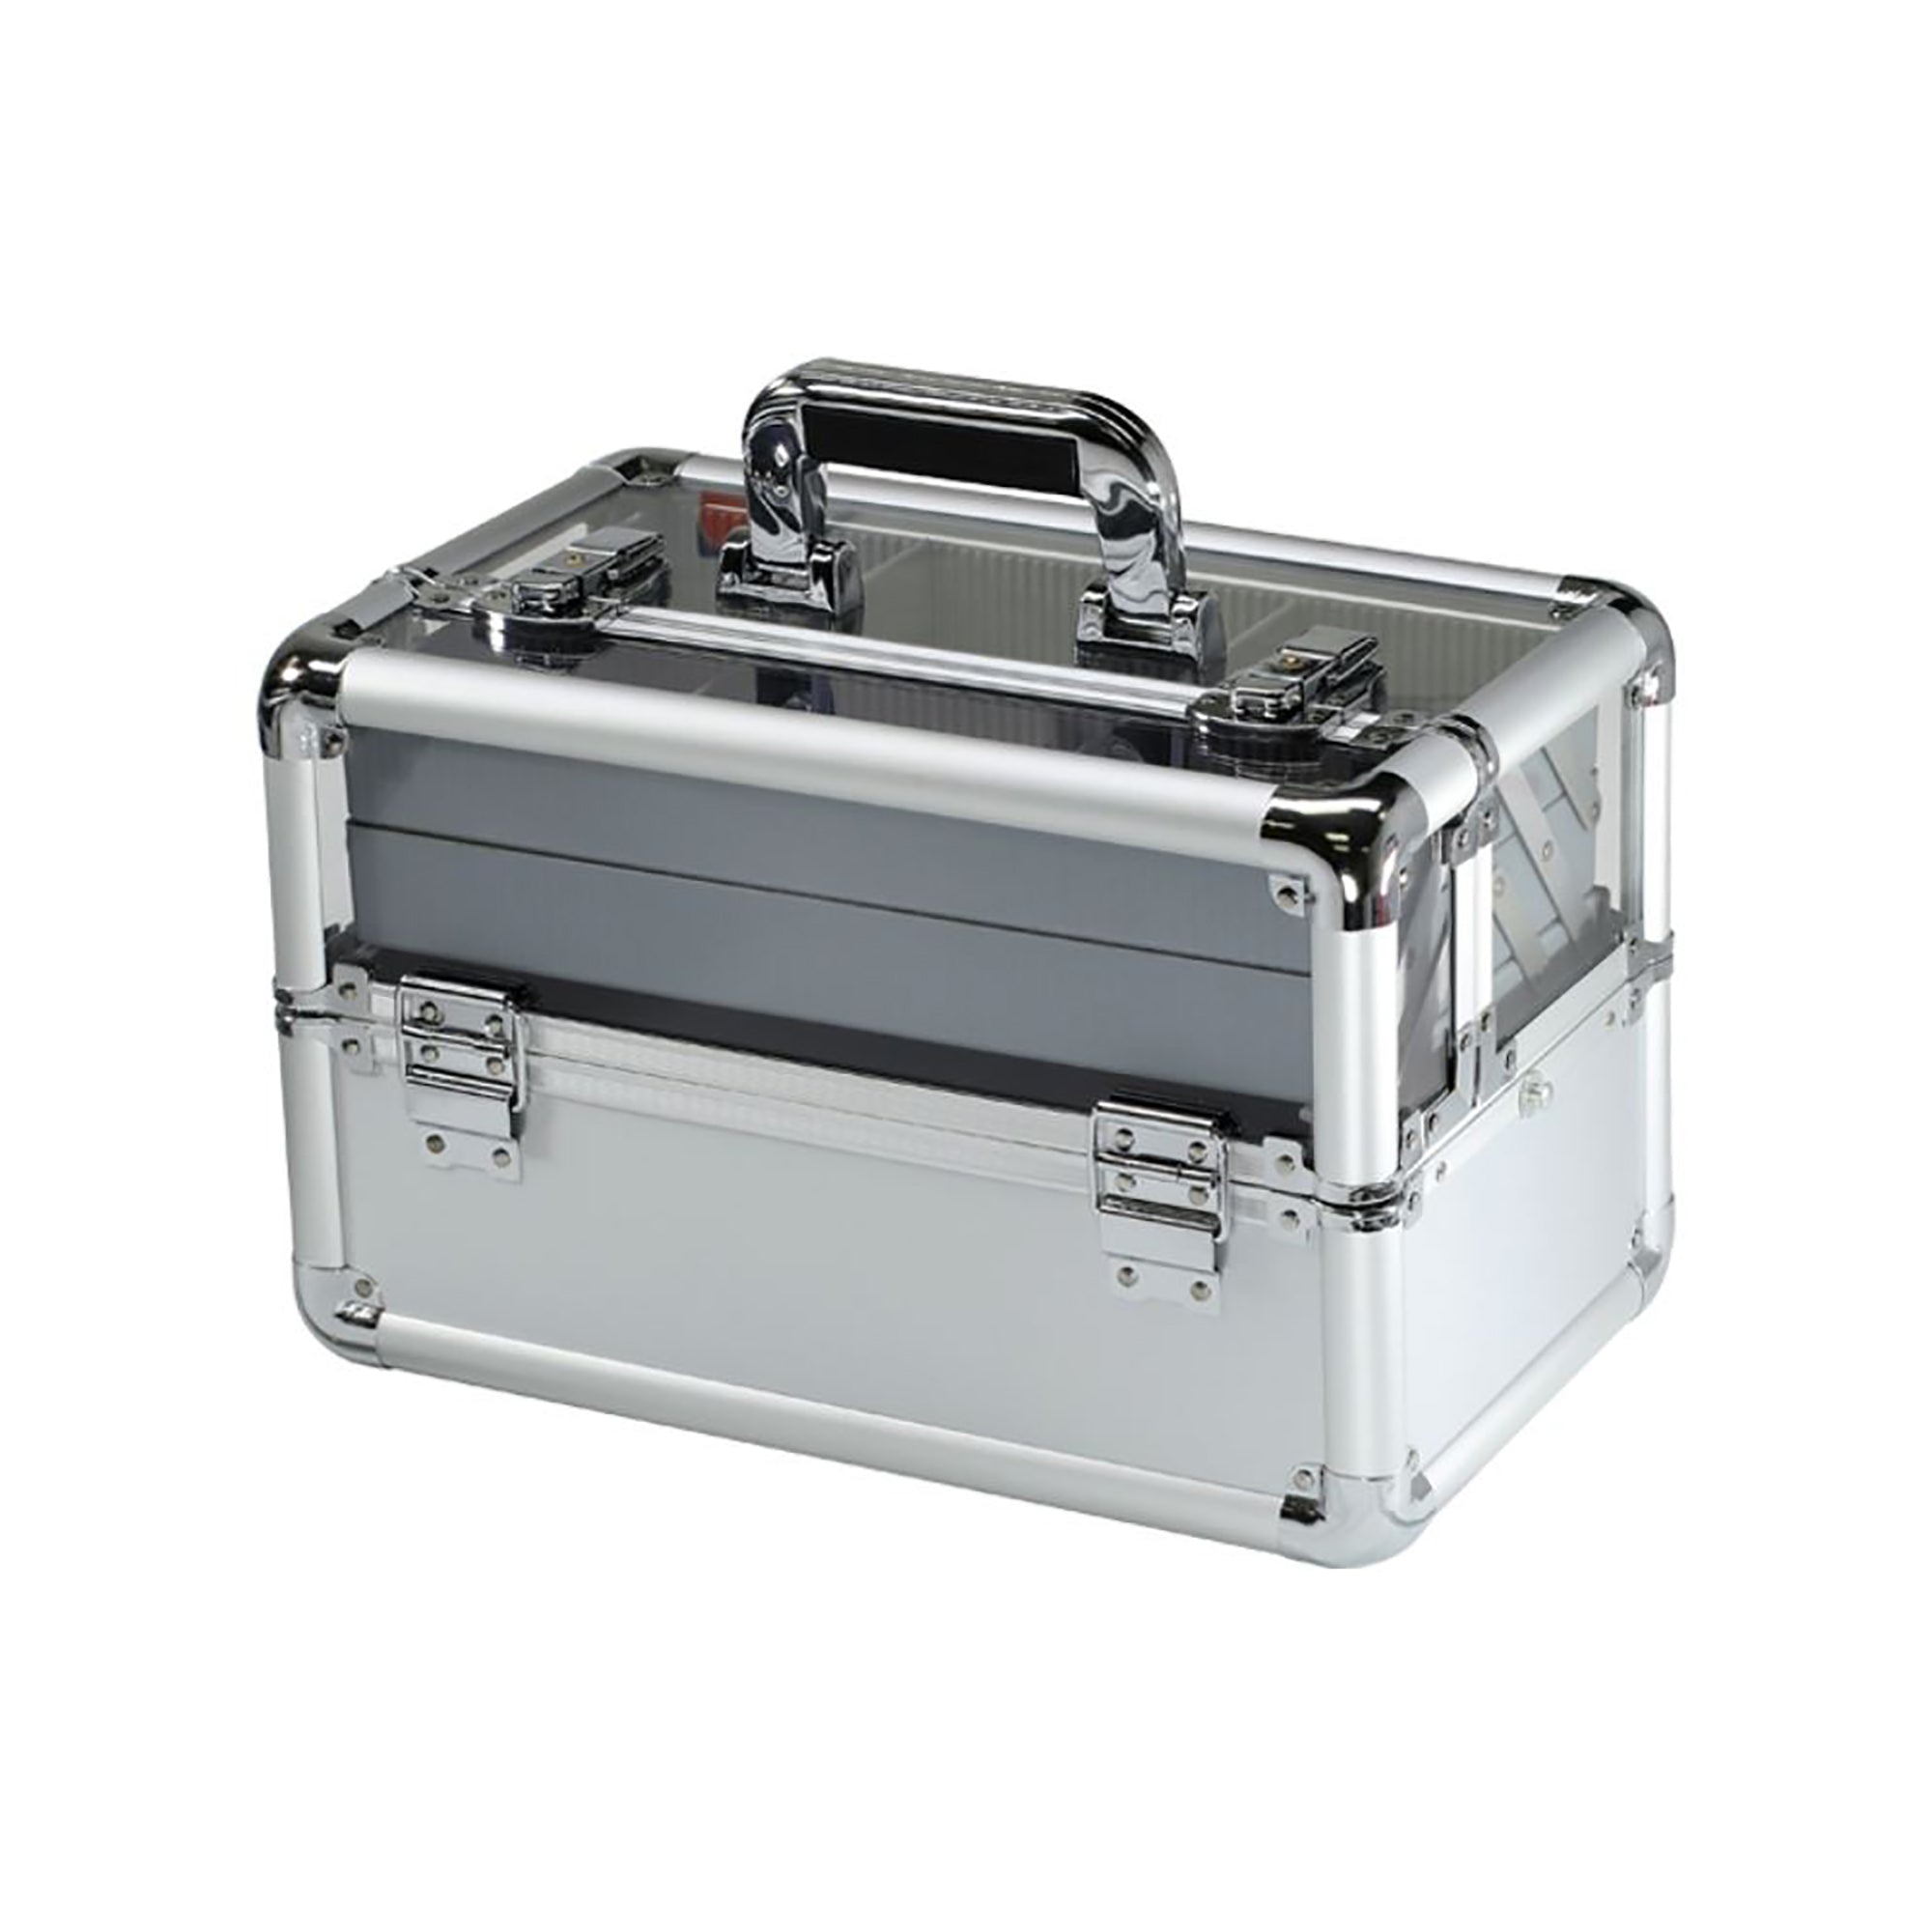 TZCASE Pro Series Beauty Case Silver Style AB-116 / TS